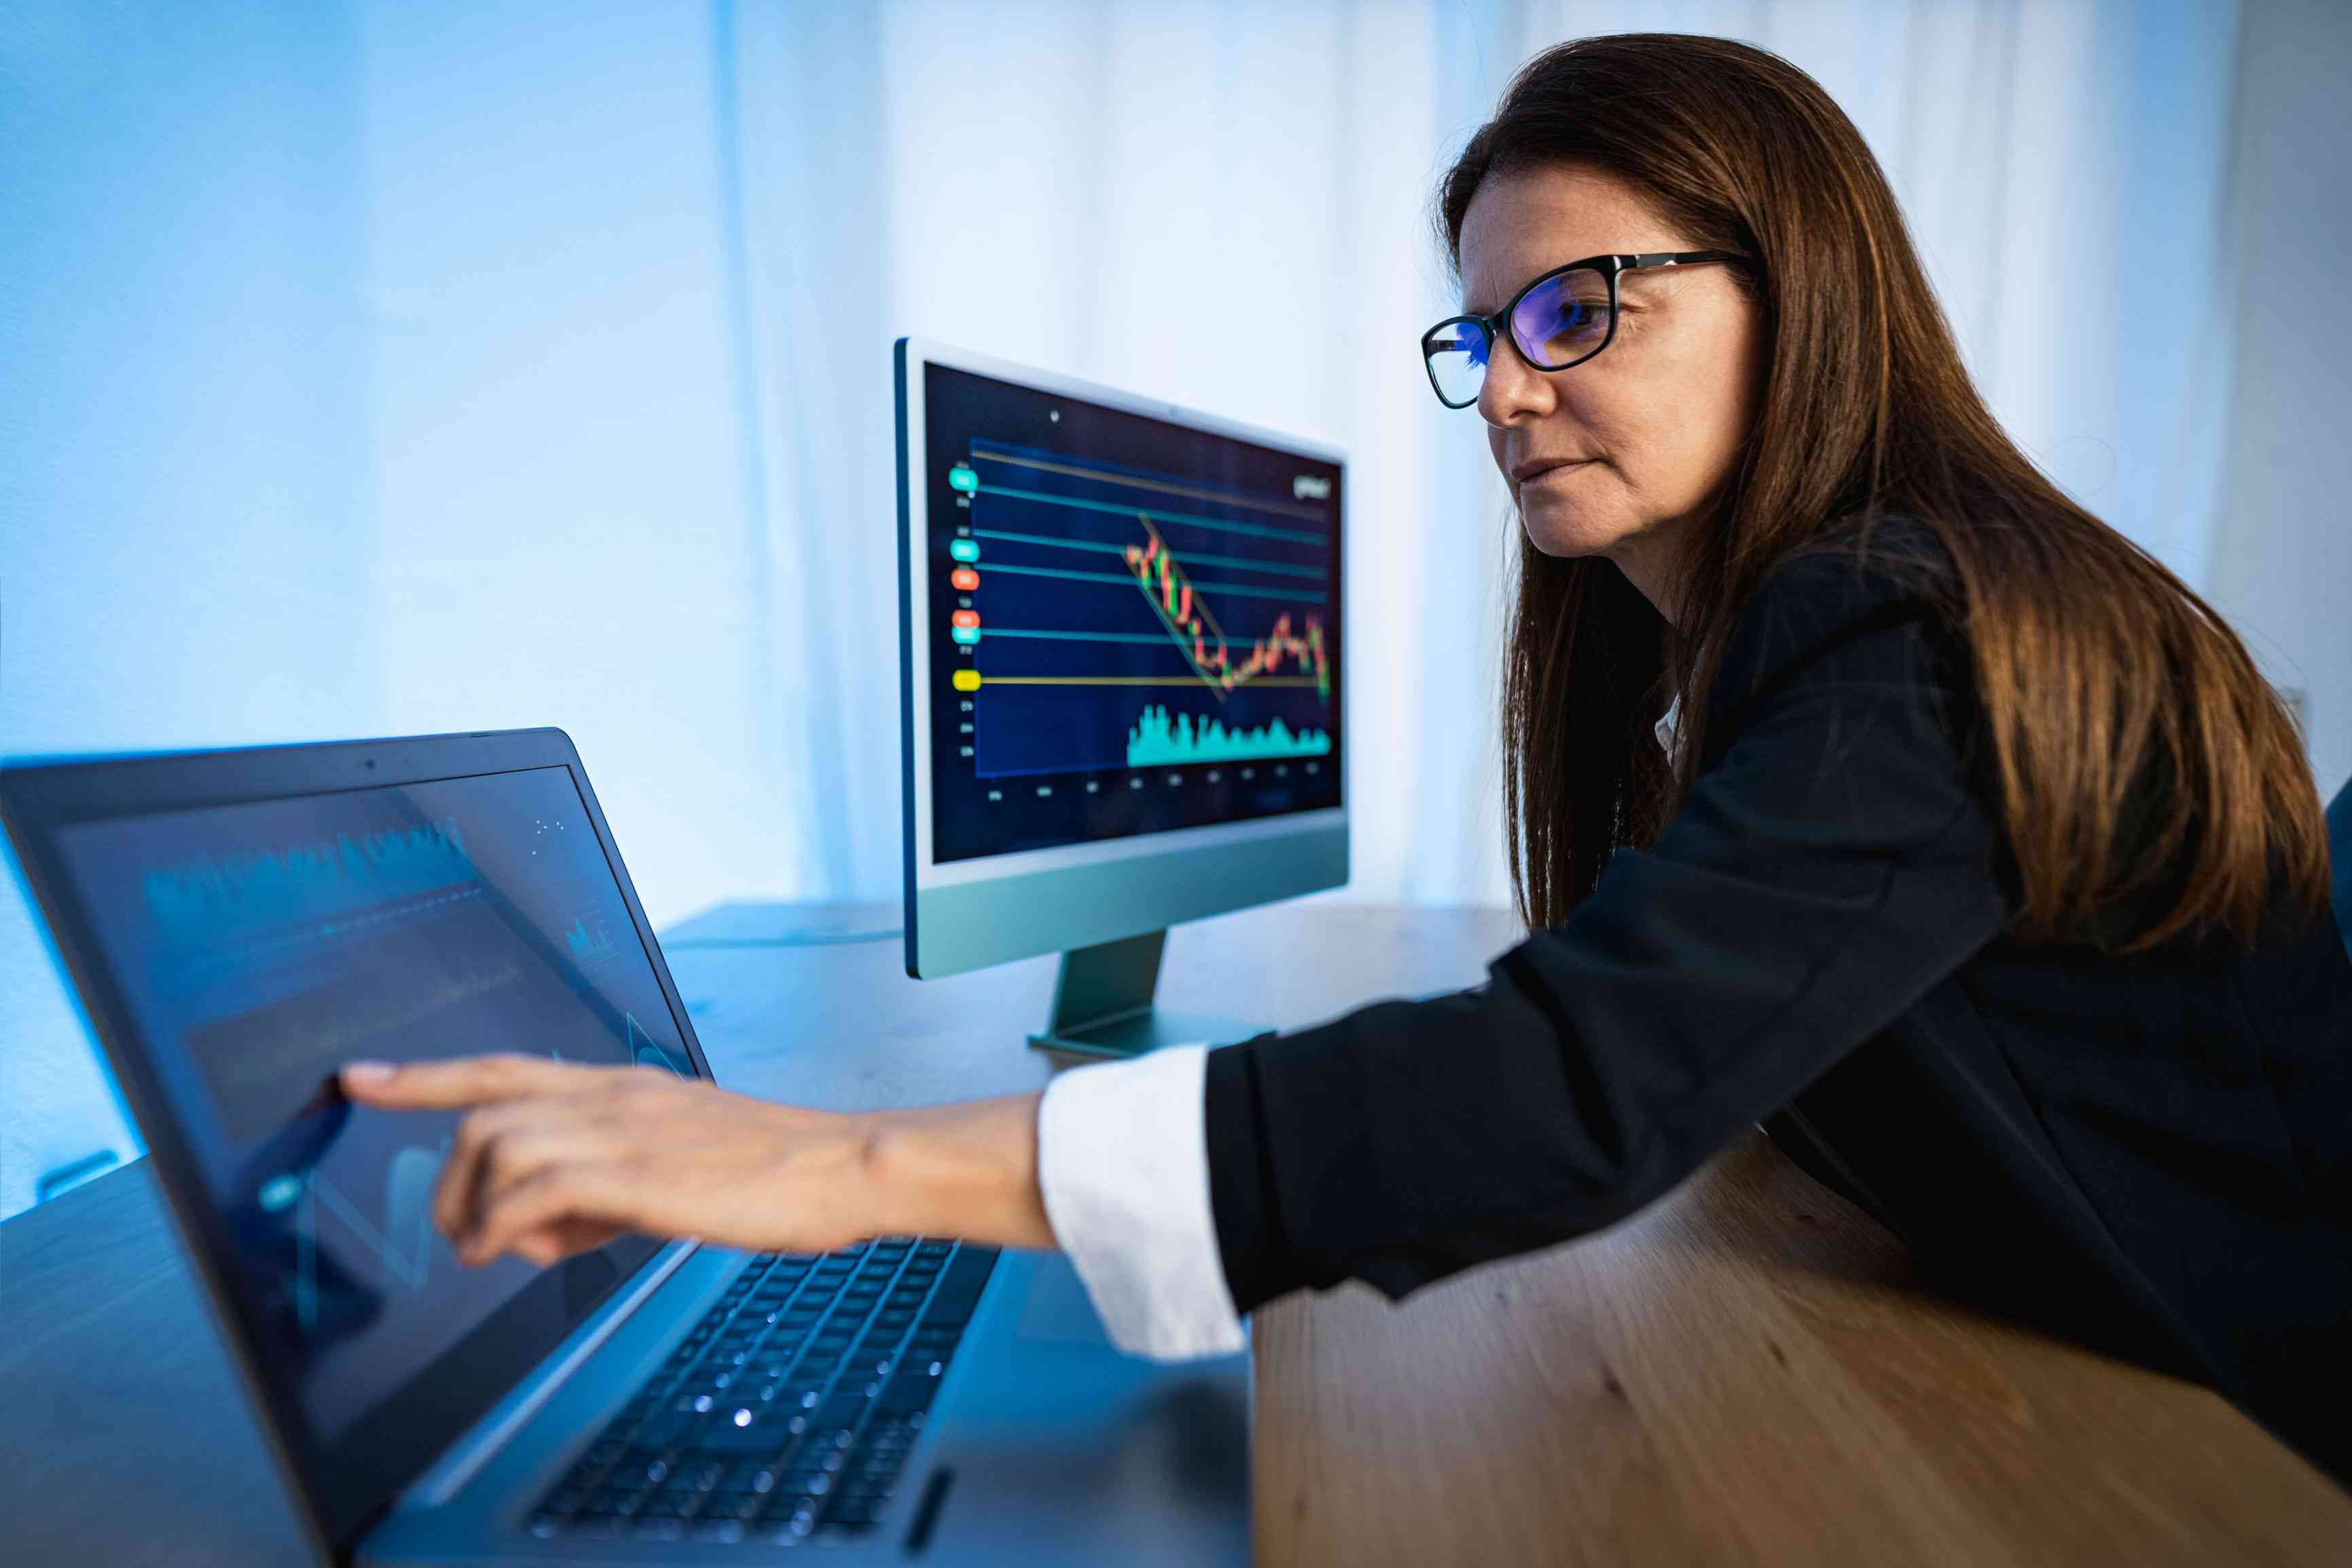 Woman looking at two computer screens with market trading information displayed